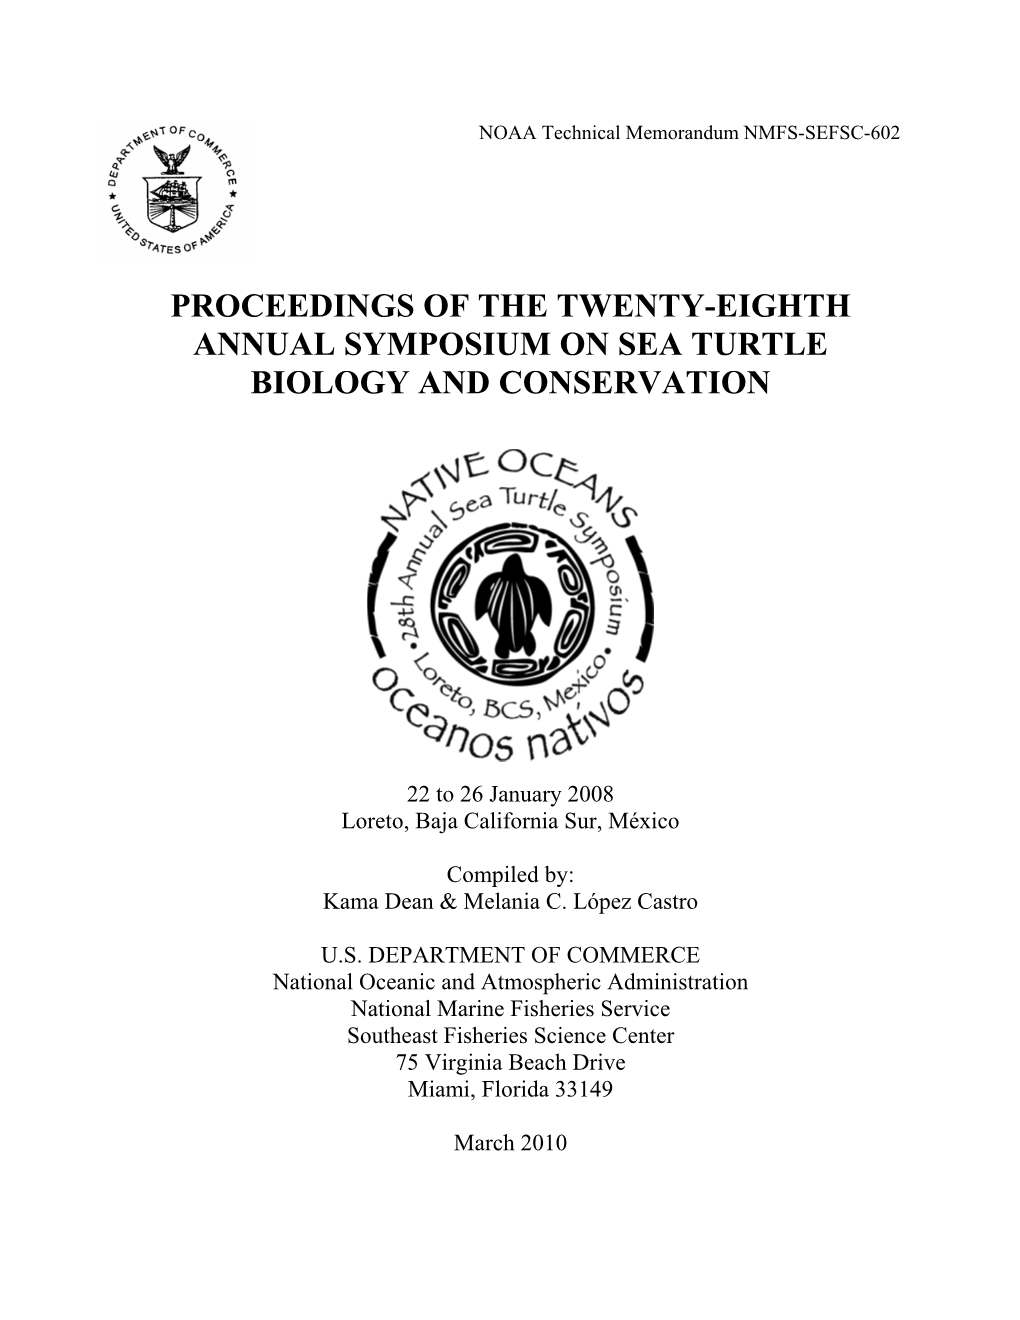 Proceedings of the Twenty-Eighth Annual Symposium on Sea Turtle Biology and Conservation